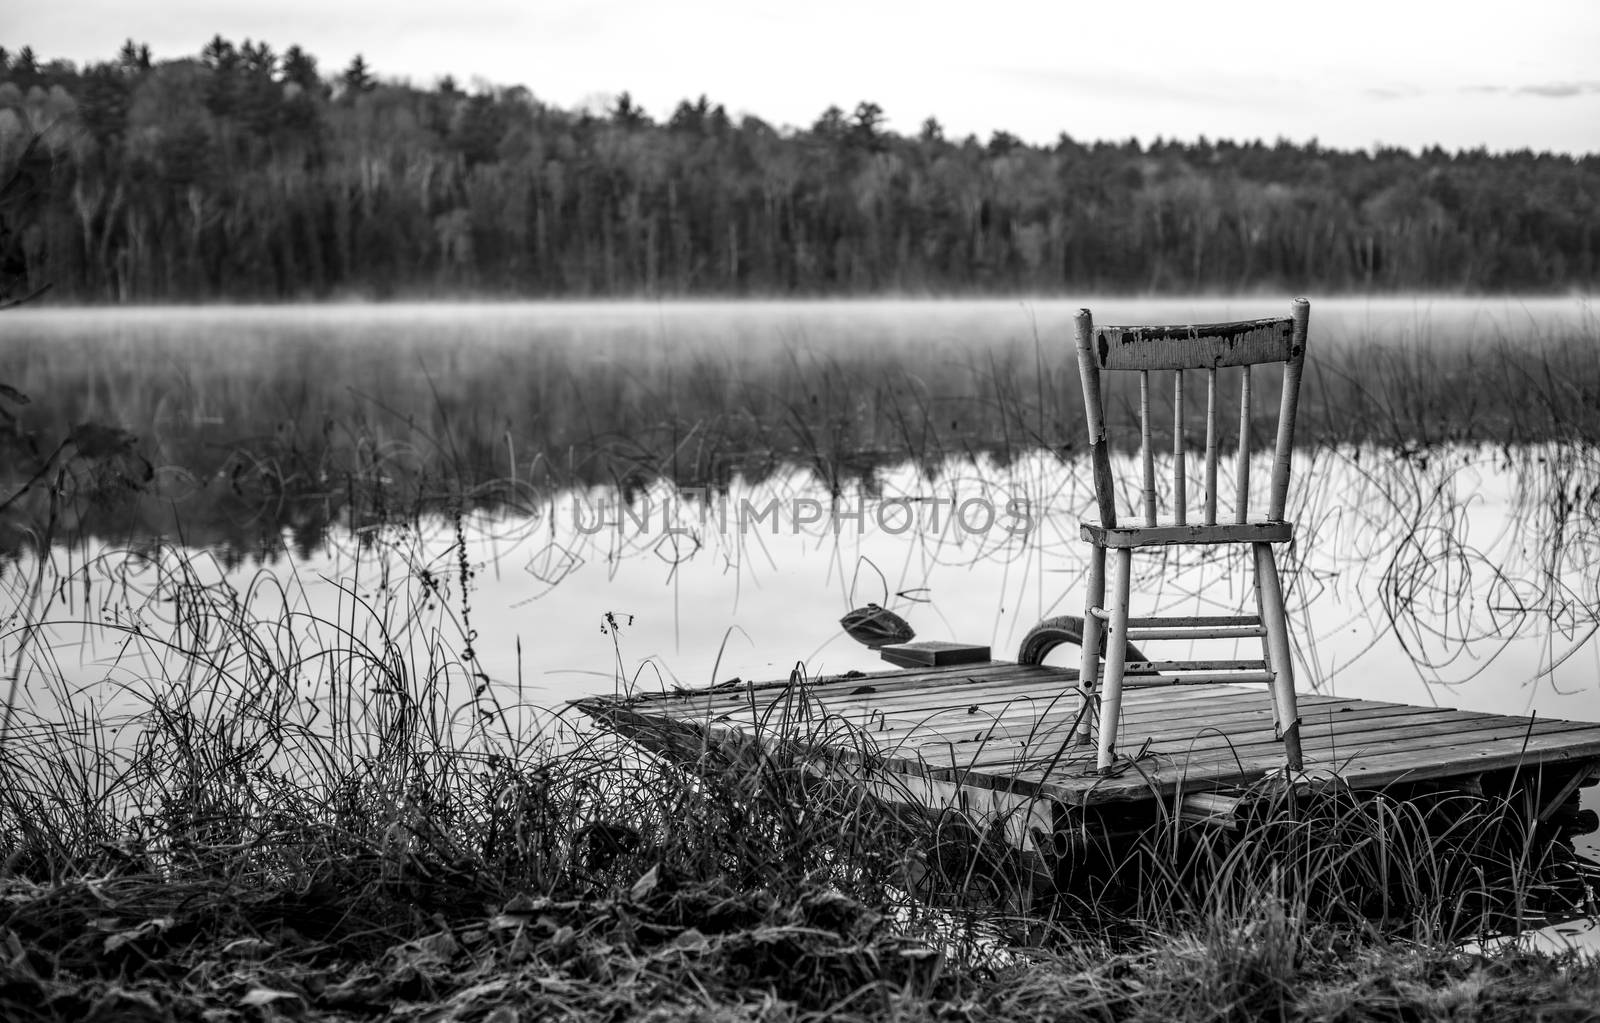 Morning reveals fog and a chair sits on a partially submerged dock beside a lake in Ontario, Canada.